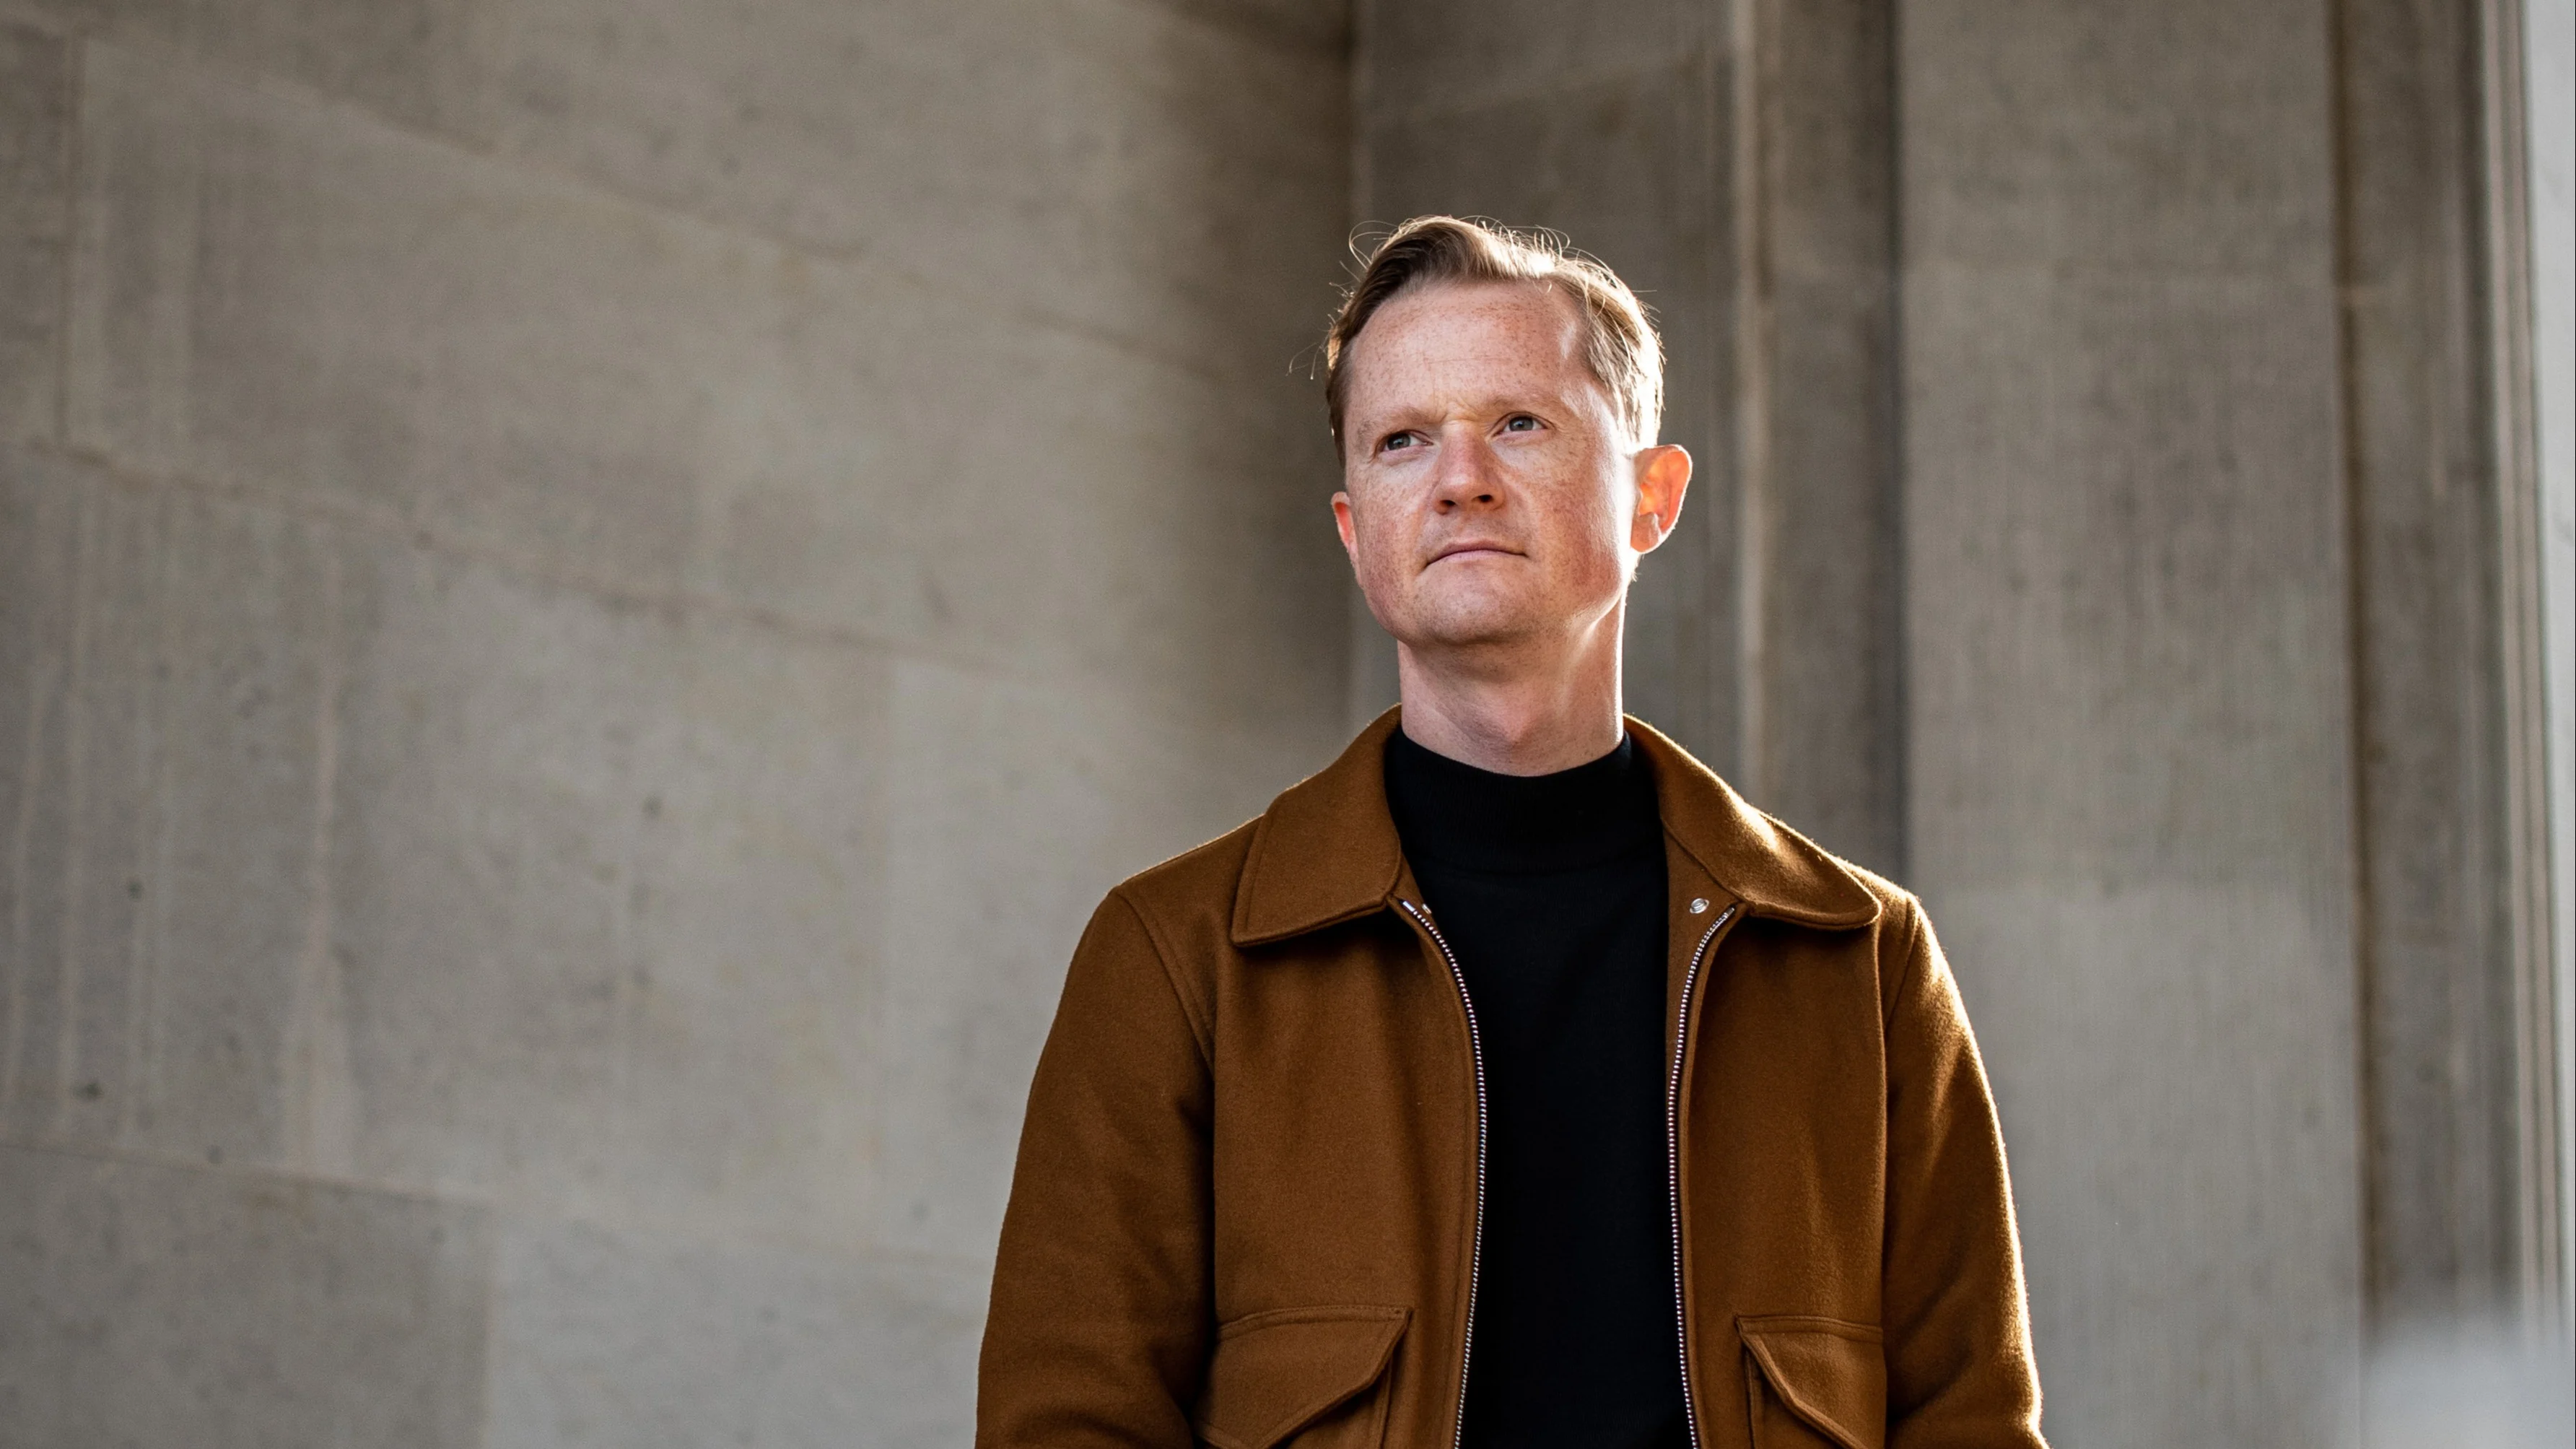 Peter Mühlmann, Founder and CEO, Trustpilot, in a brown jacket and black turtleneck